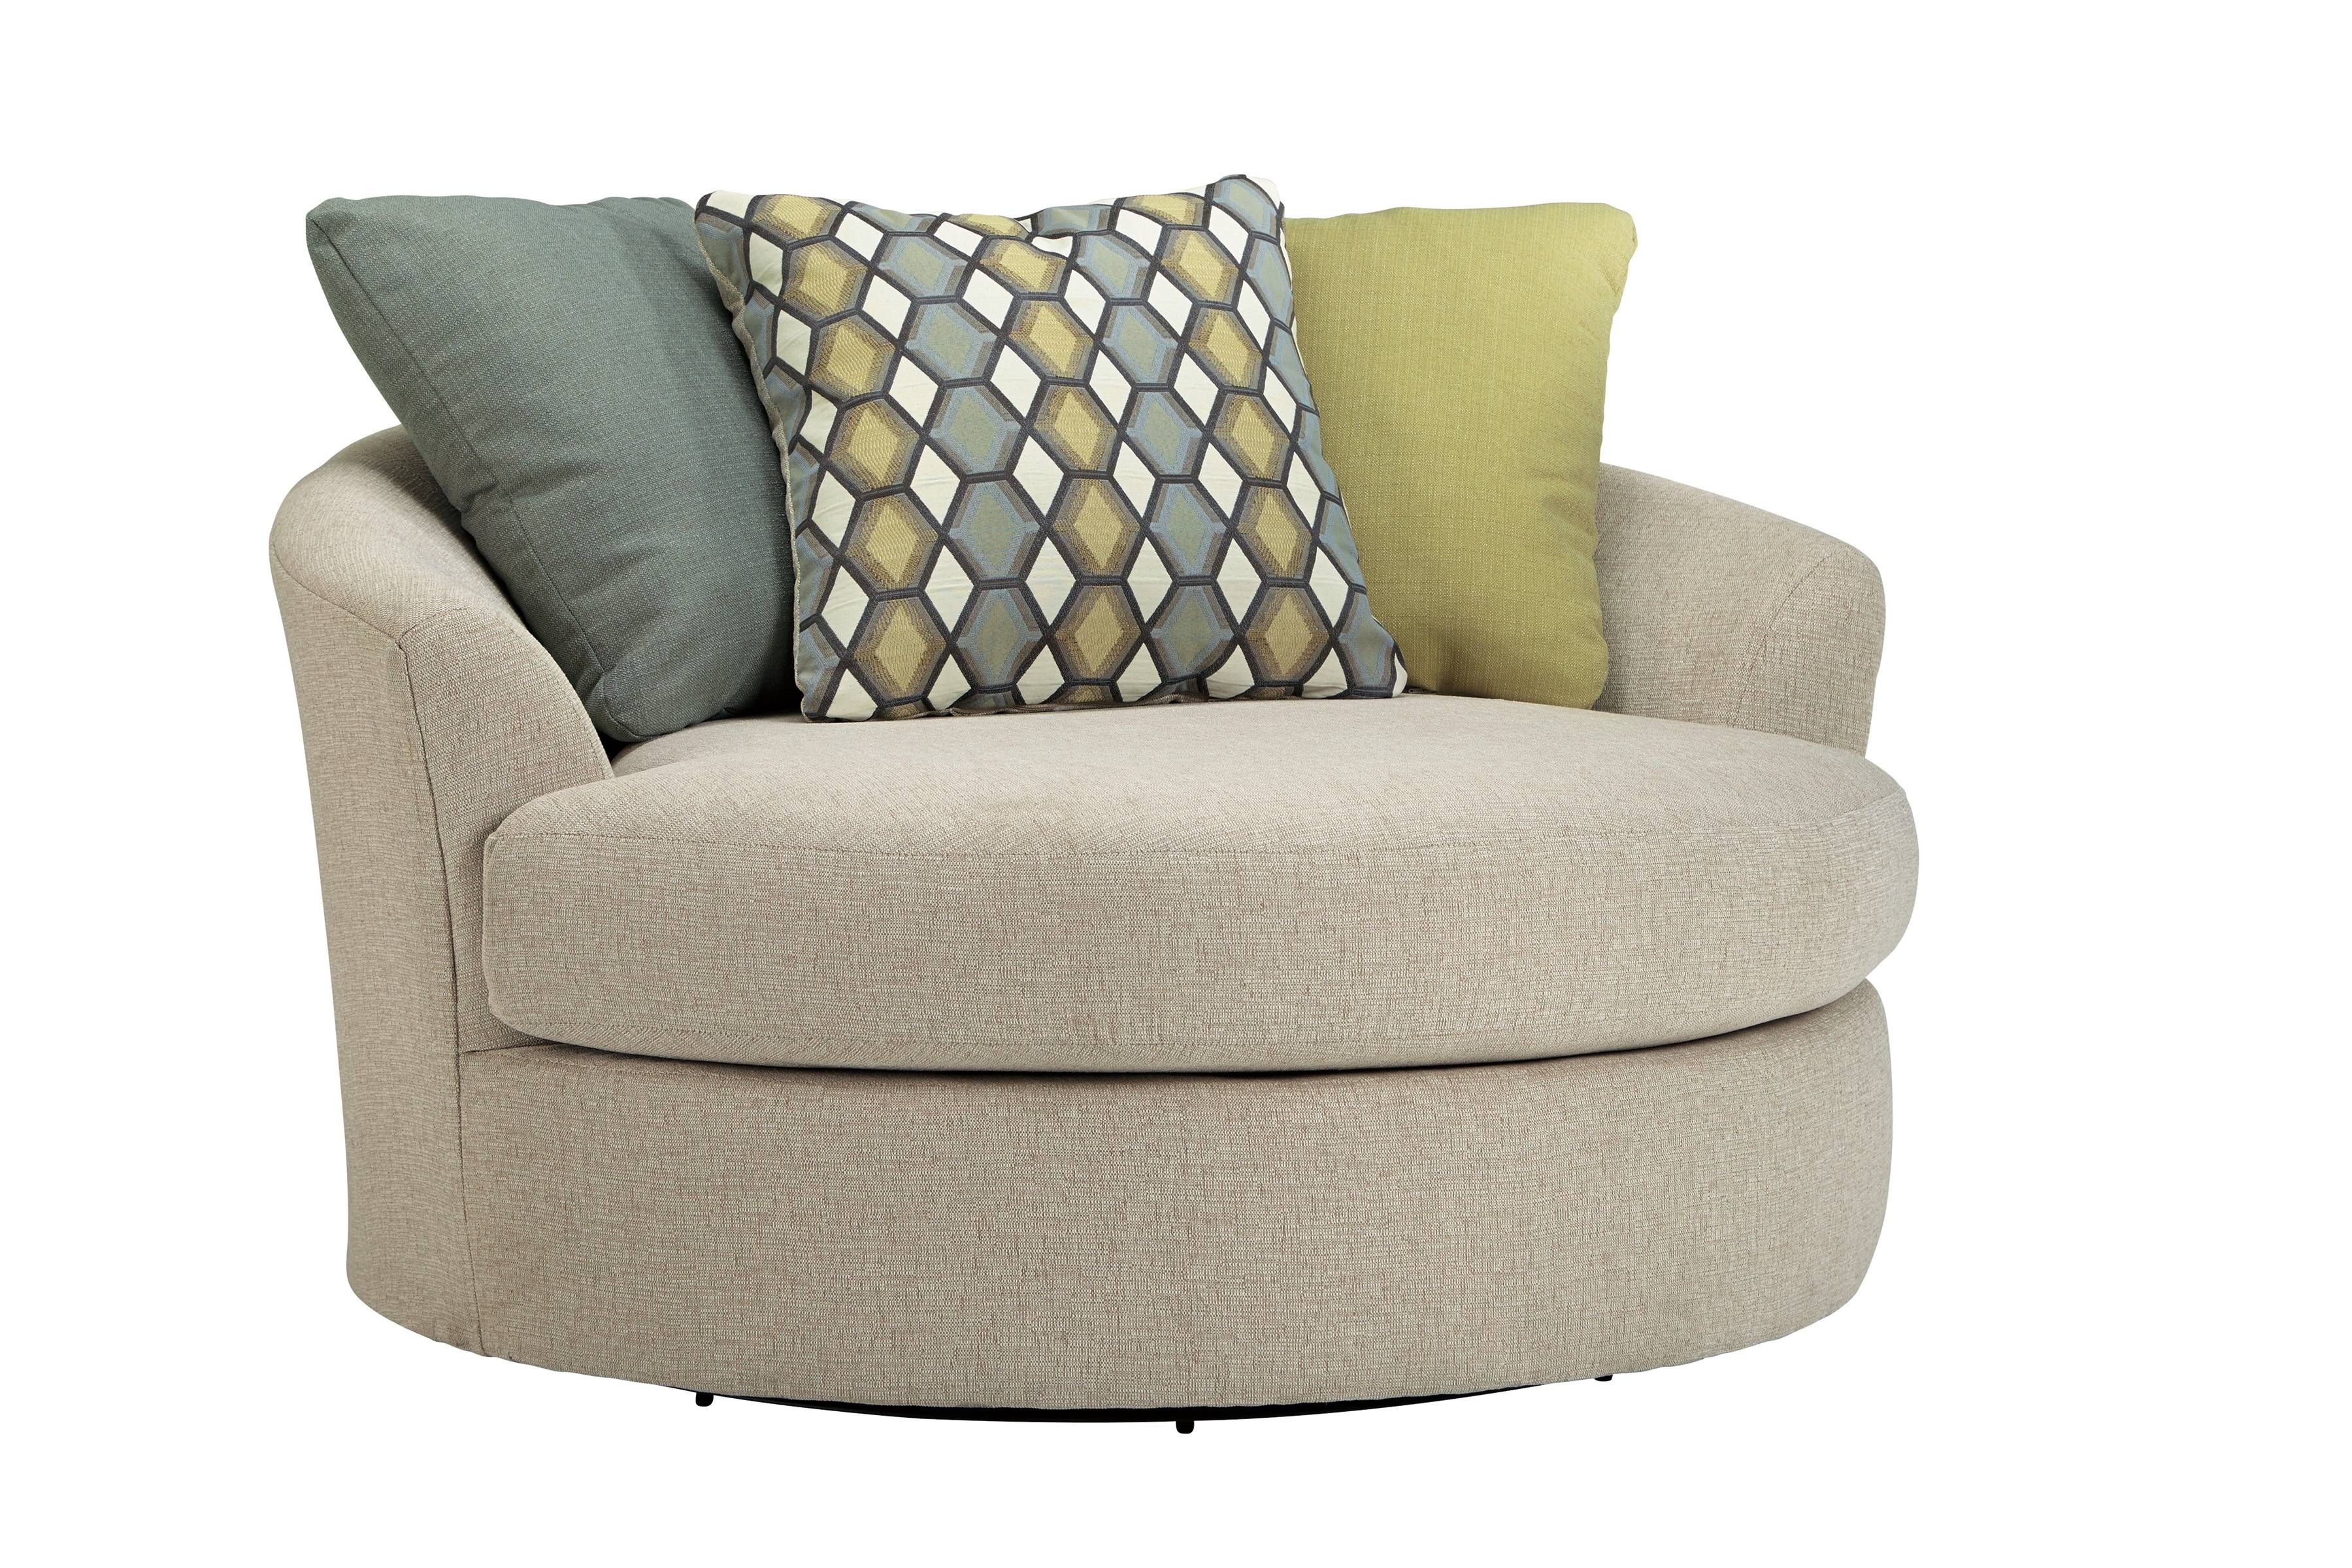 Furniture: Swivel Chairs For Living Room And Oversized Round In Cuddler Swivel Sofa Chairs (View 20 of 30)